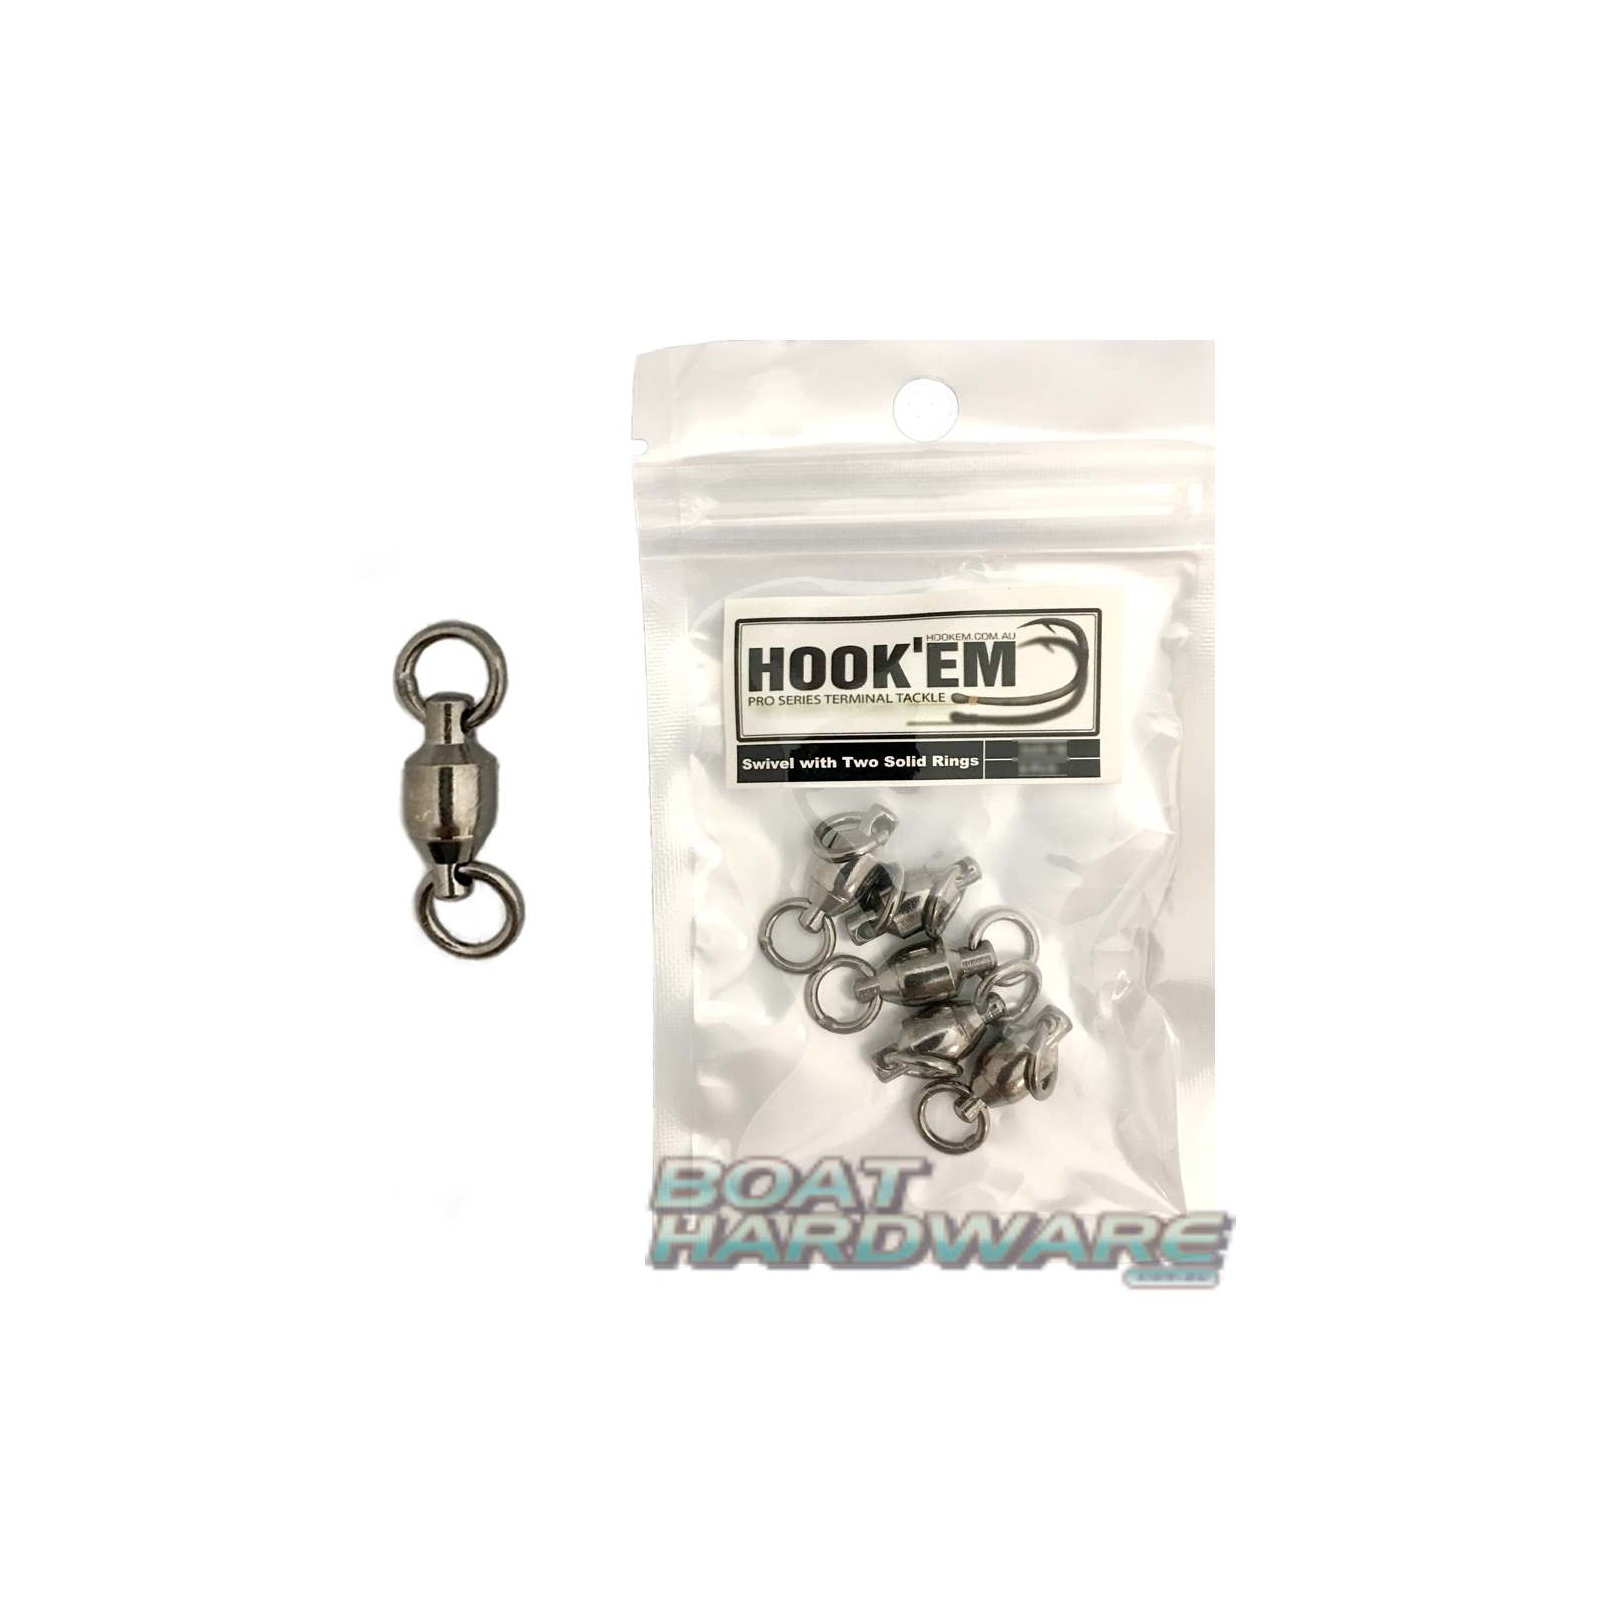 Size 1 Ball Bearing Swivel - 2 Solid Rings (Pack of 10)